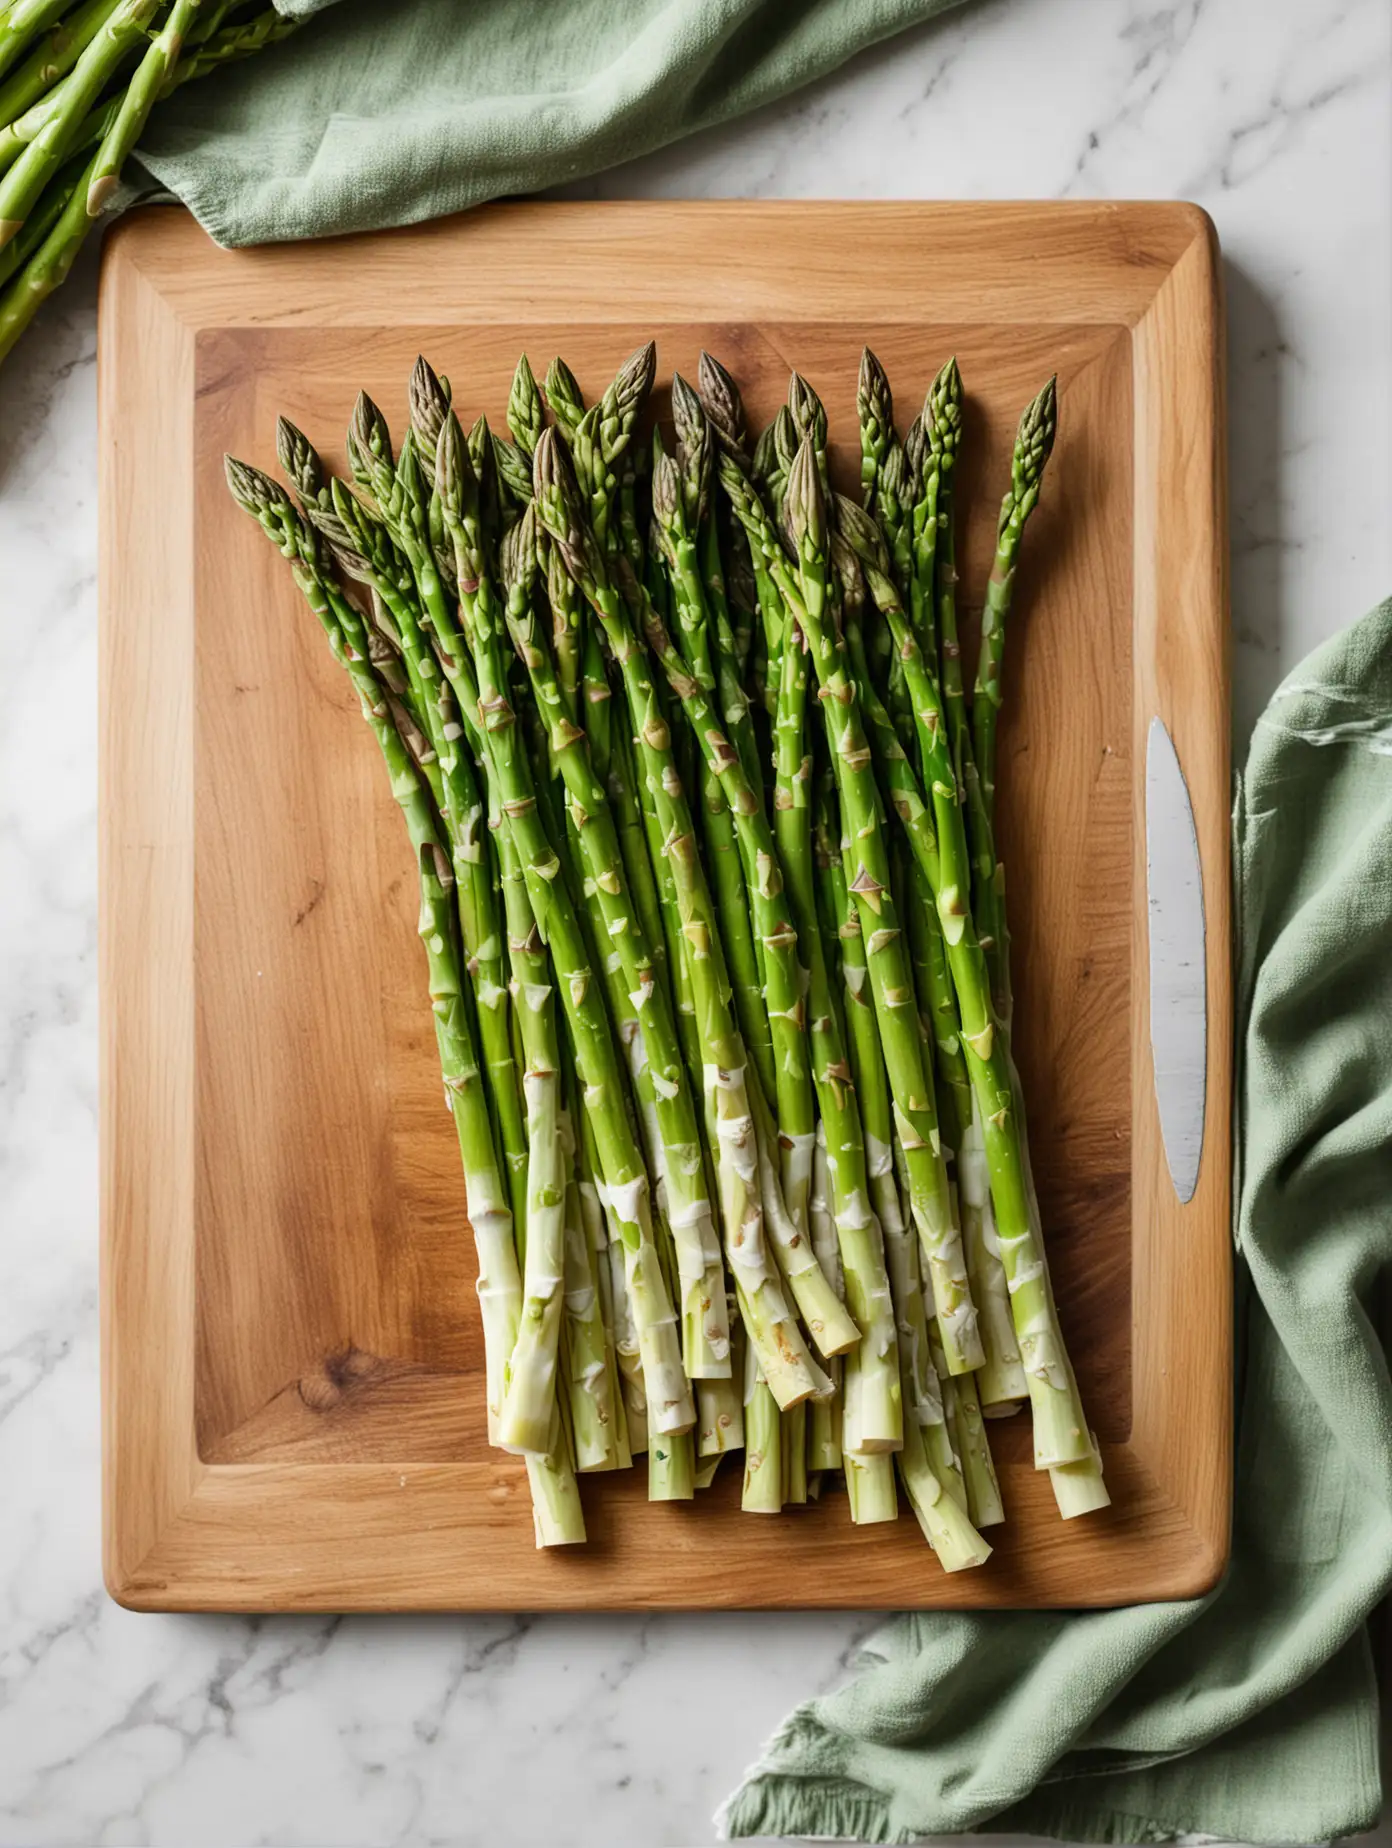 A top view of fresh asparagus on an old wooden cutting board on a white marble counter. Under the cutting board is a green and white dishtowel

